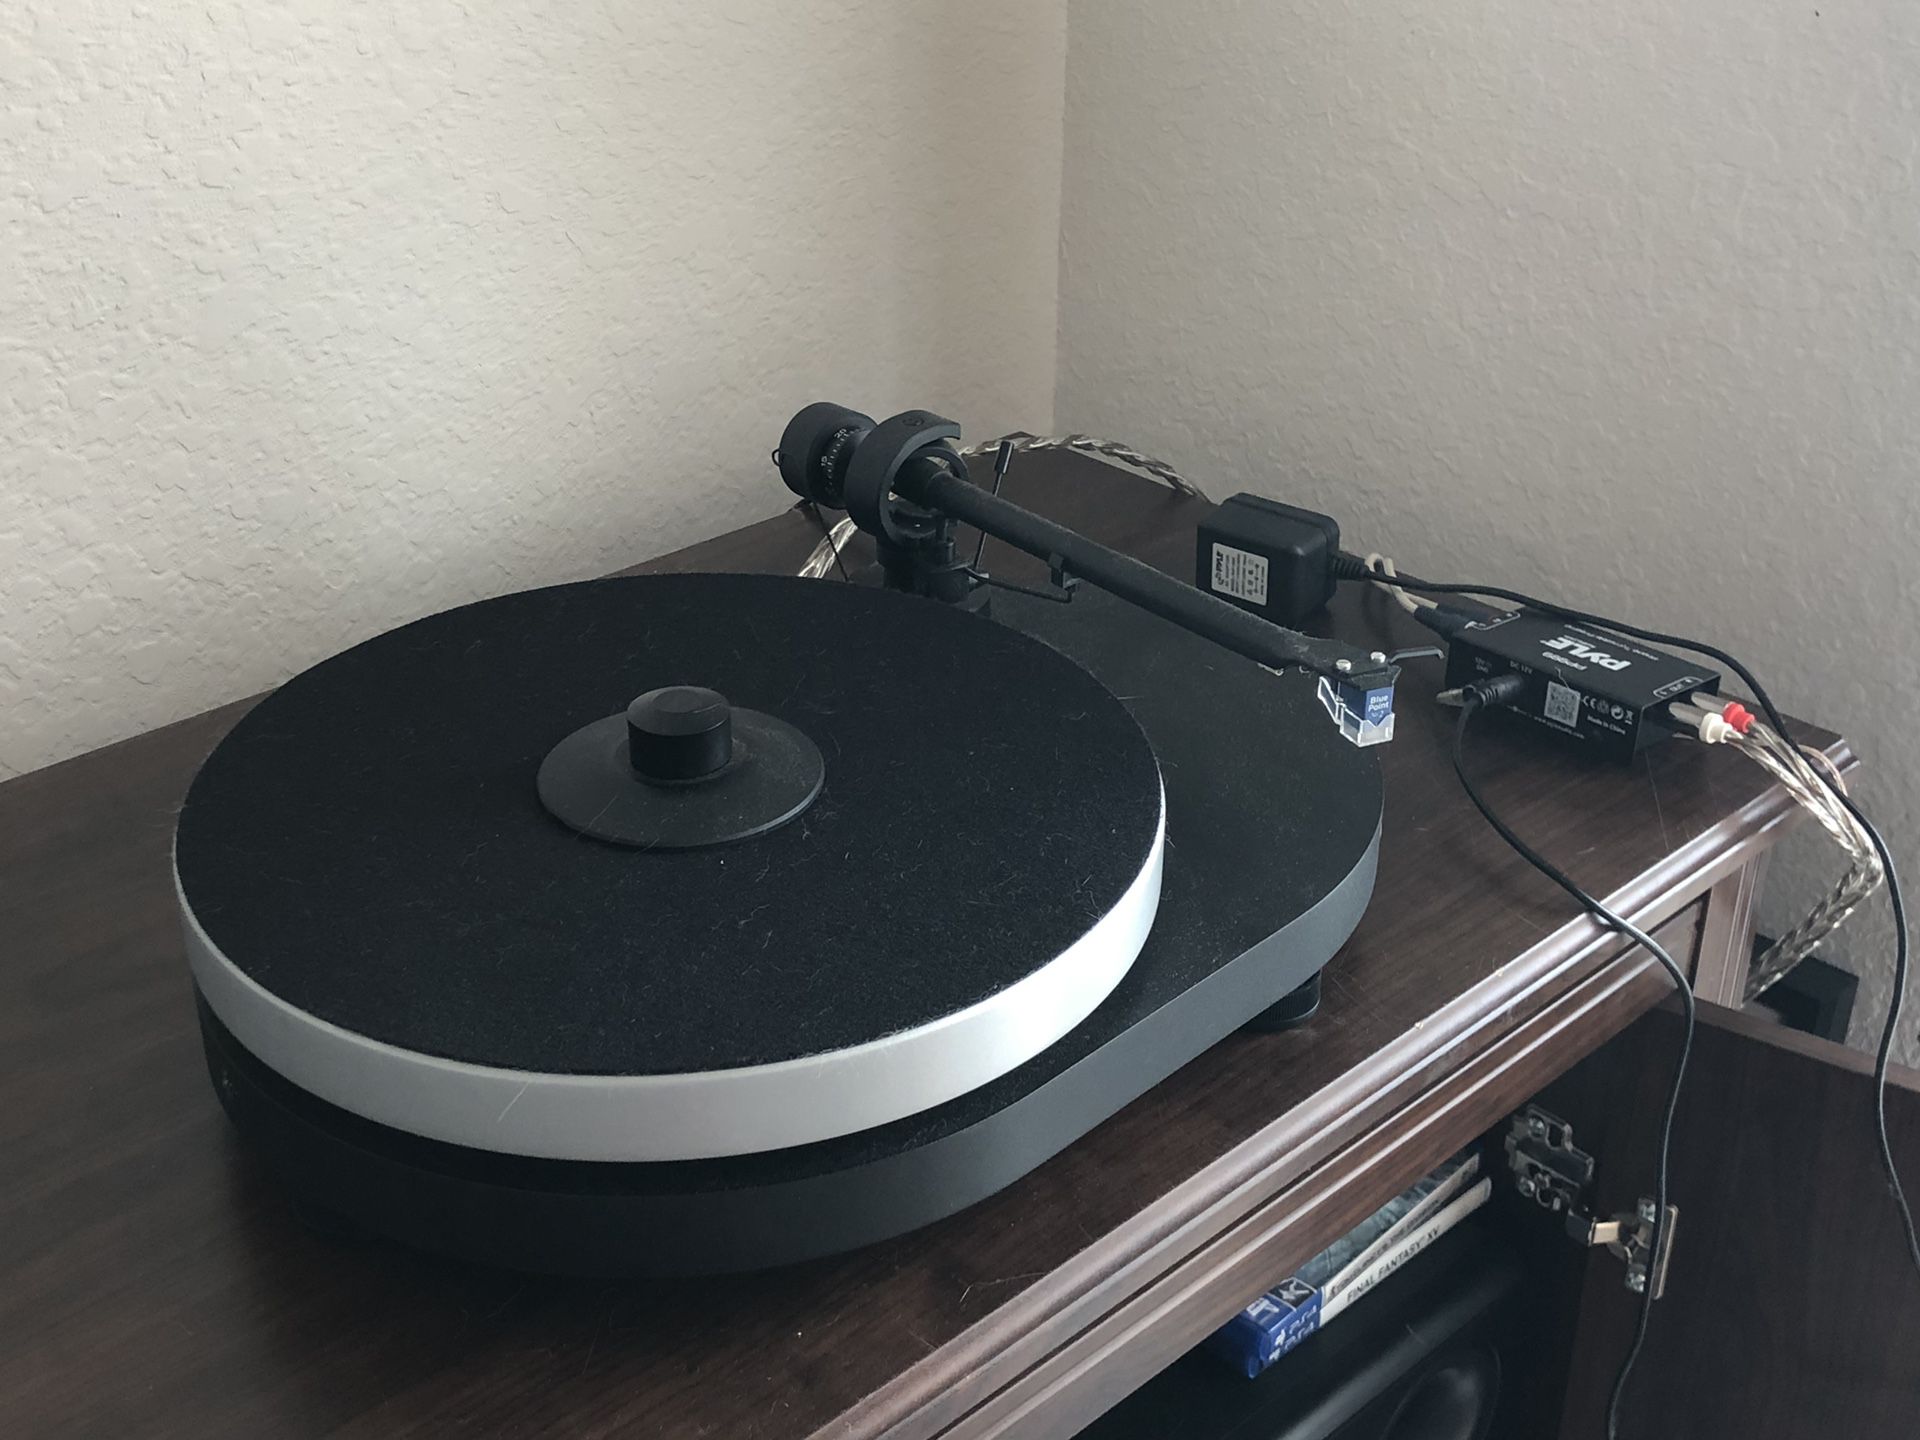 Record player, power conditioner and Yamaha stereo setup